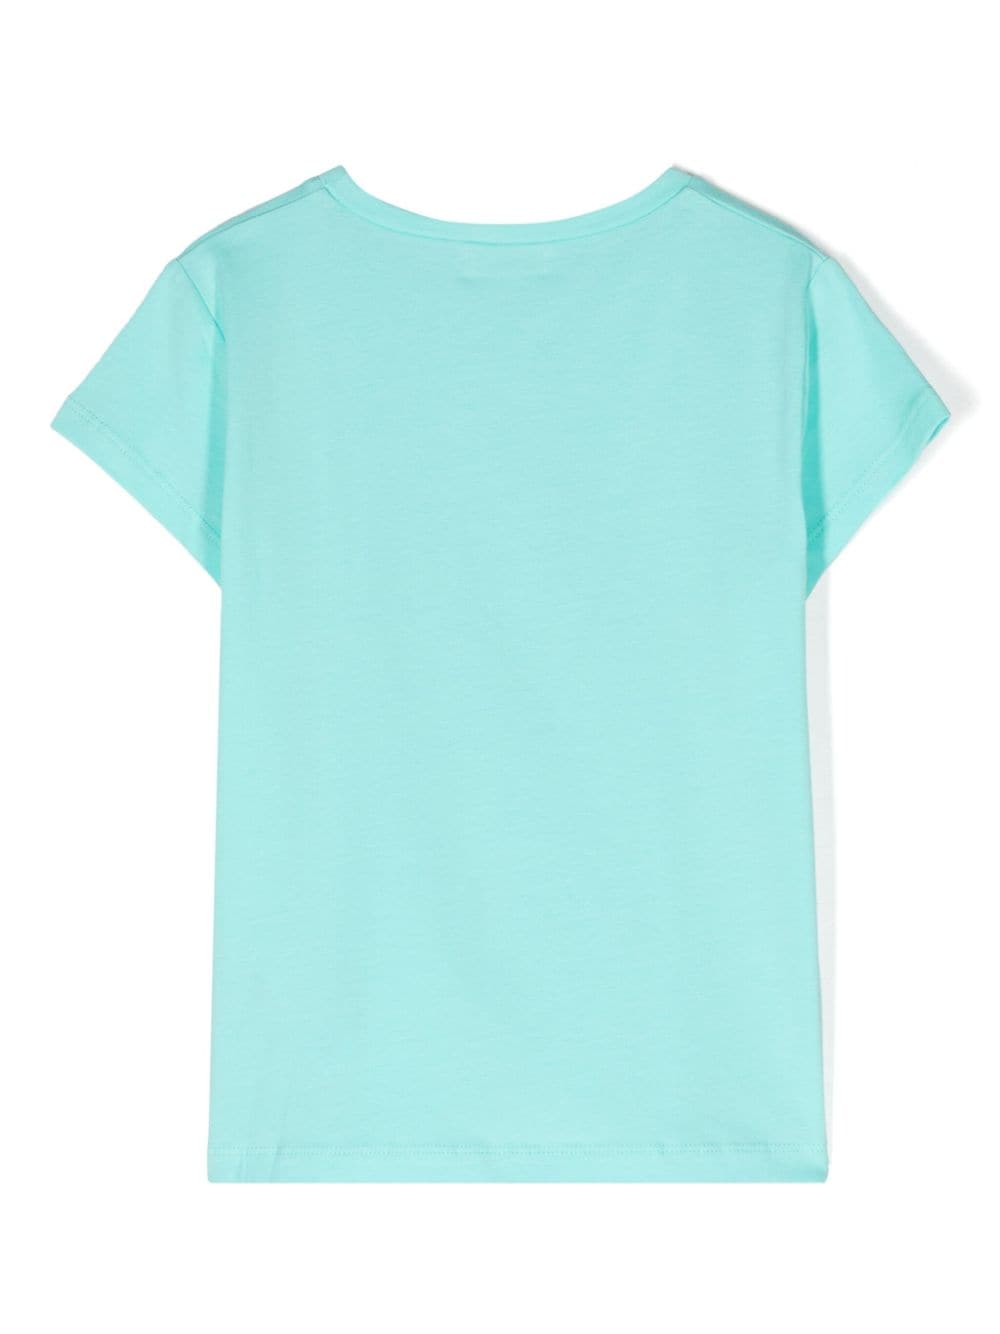 Blue t-shirt for girls with print